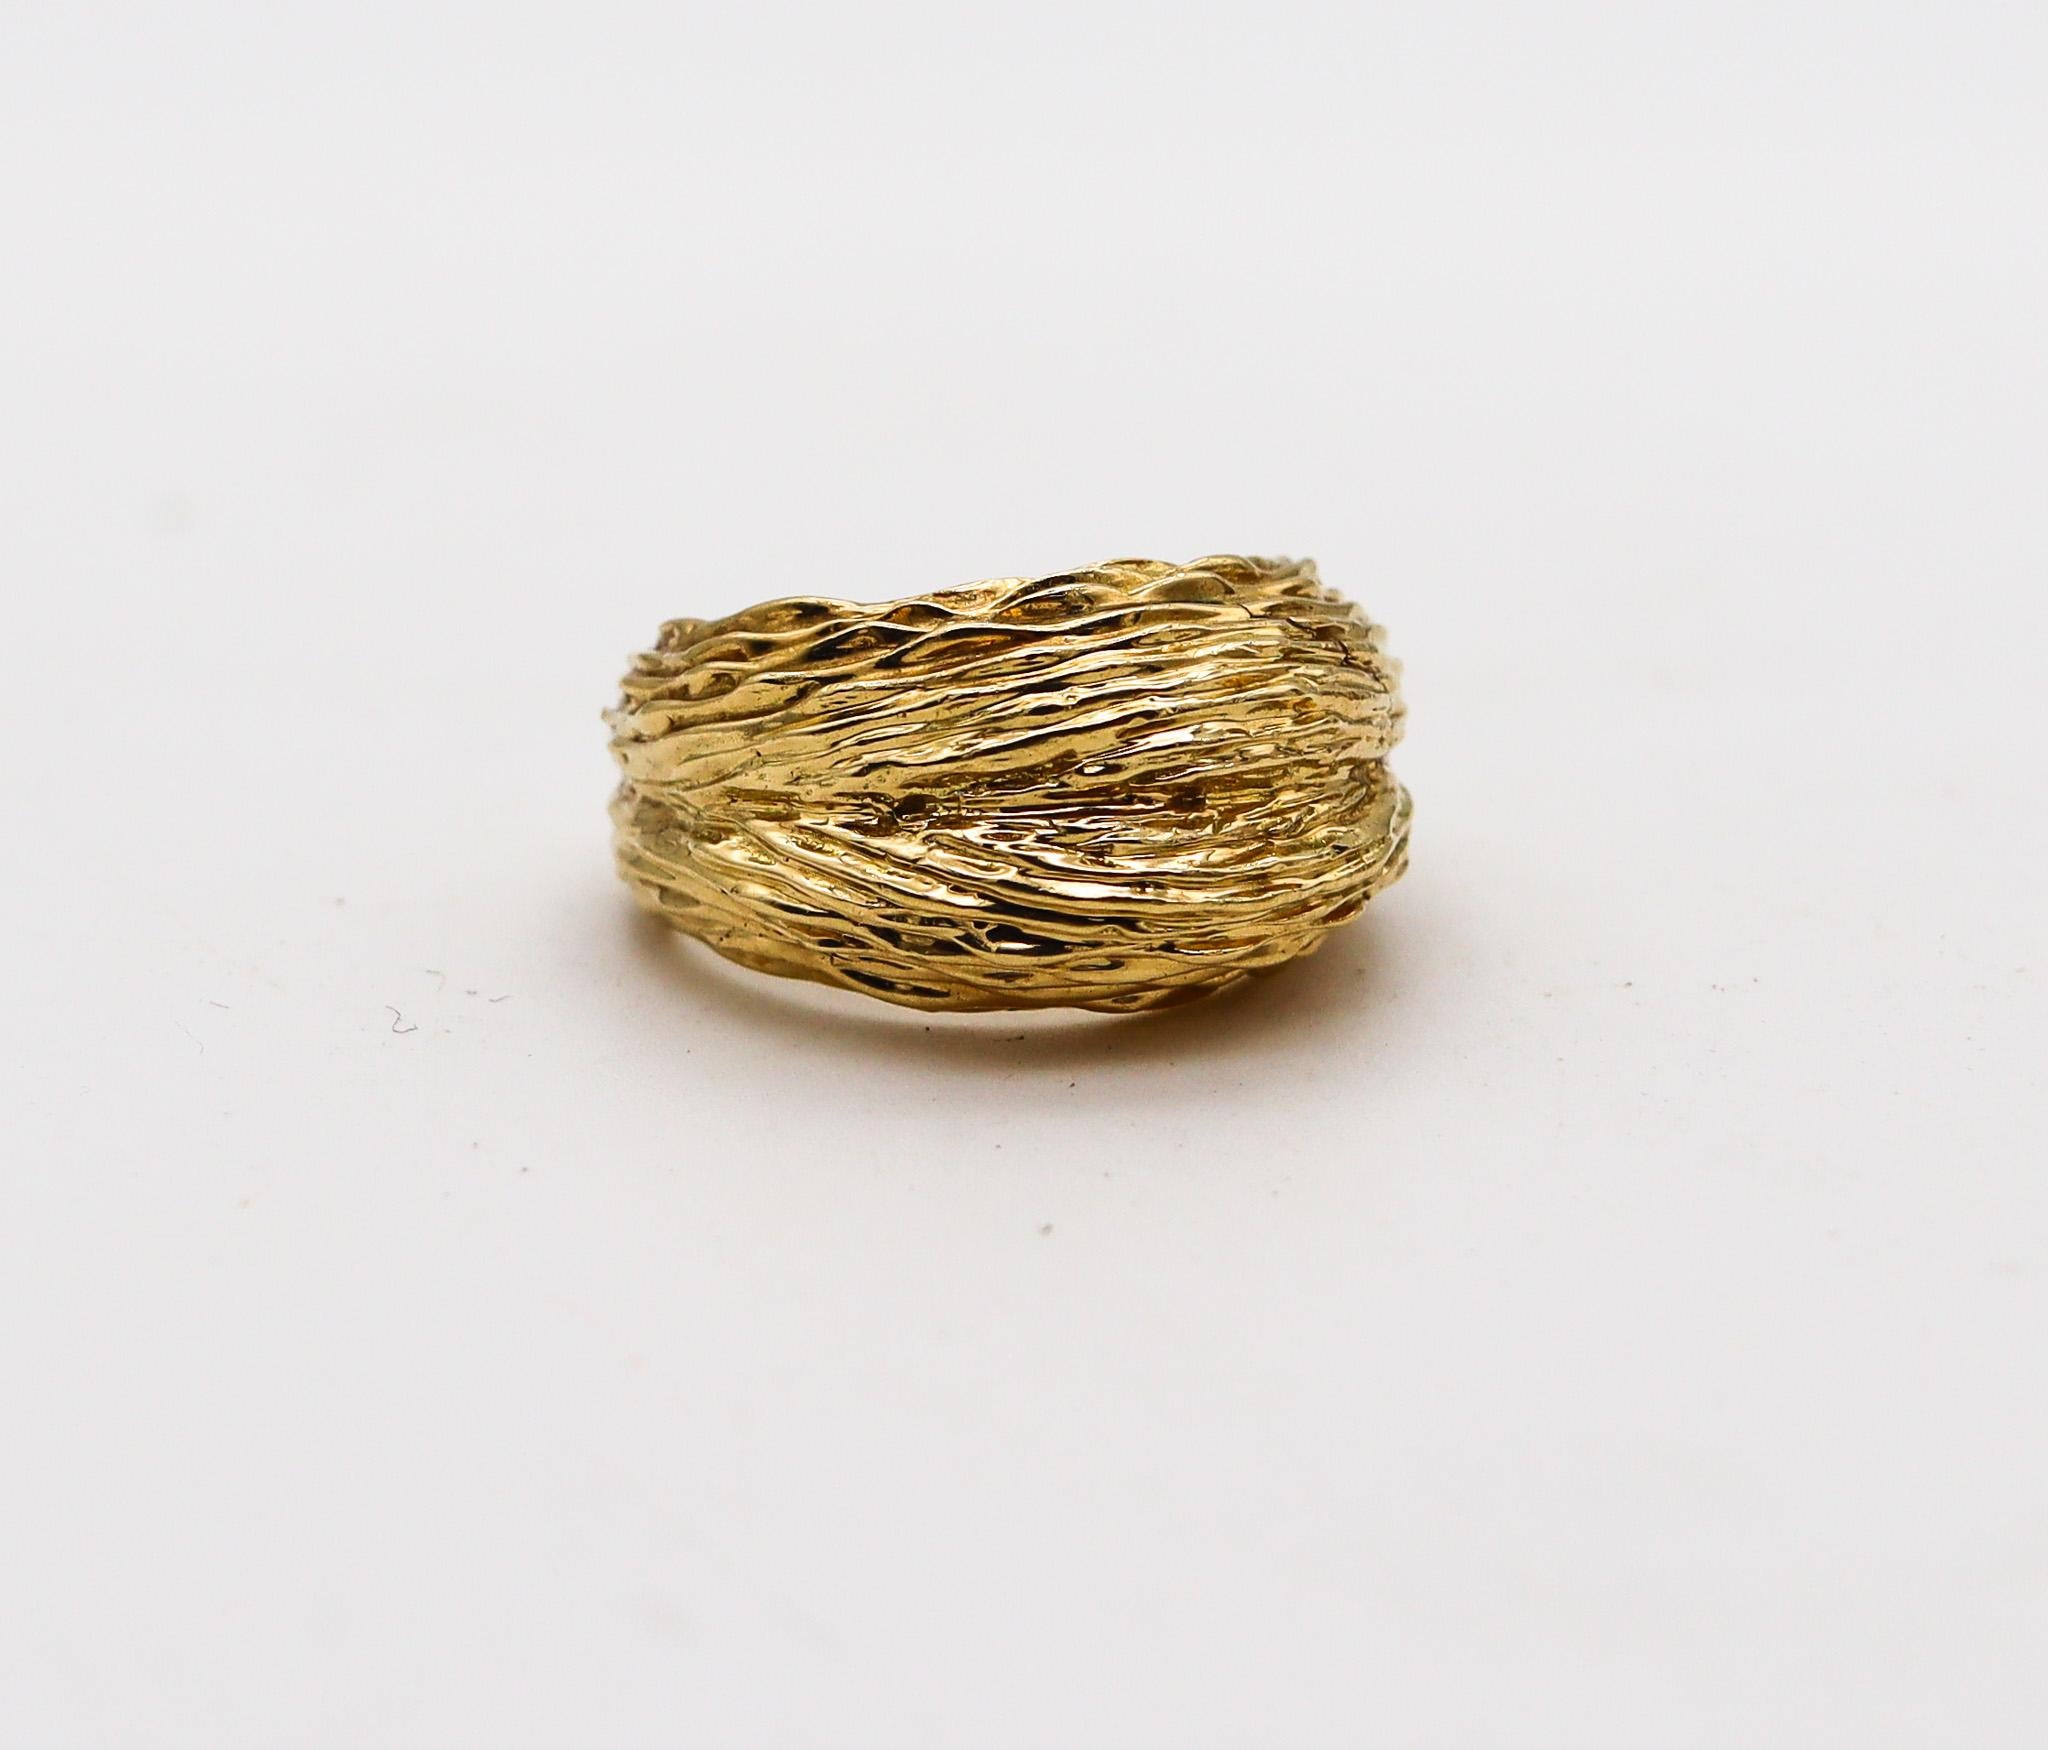 Textured ring designed by Van Cleef & Arpels.

Very beautiful everyday ring, created in Paris France by the jewelry house of Van Cleef & Arpels, back in the 1970. This ring has been crafted with in solid yellow gold of 18 karats with textured